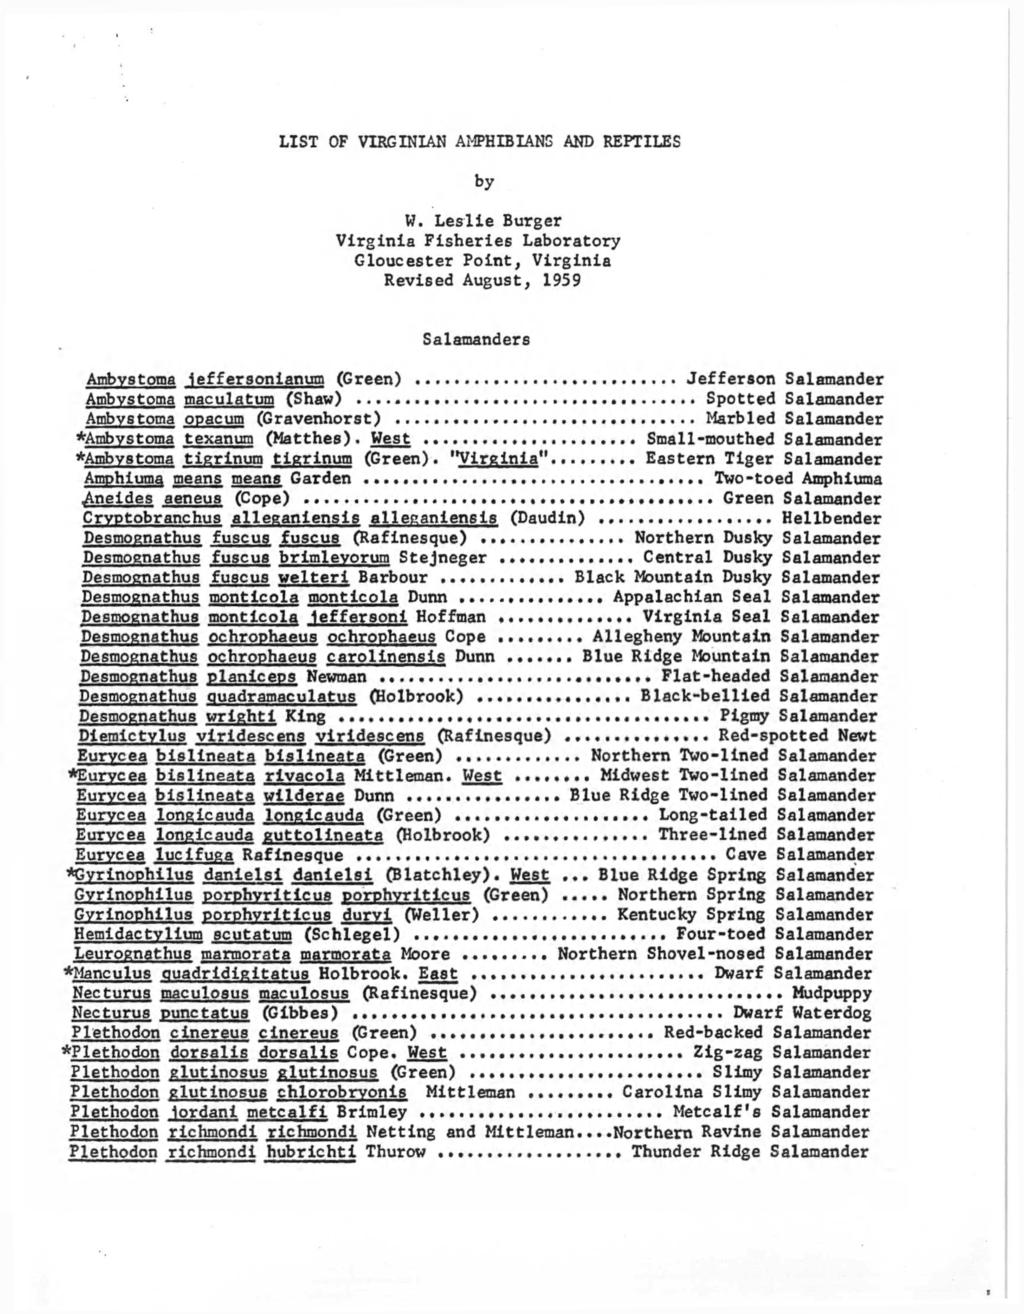 LIST OF VIRGINIAN AMPHIBIANS AND REPTILES by W. Leslie Burger Virginia Fisheries Laboratory Gloucester Point, Virginia Revised August, 1959 Salamanders Ambvstoma ieffersonianum (Green).